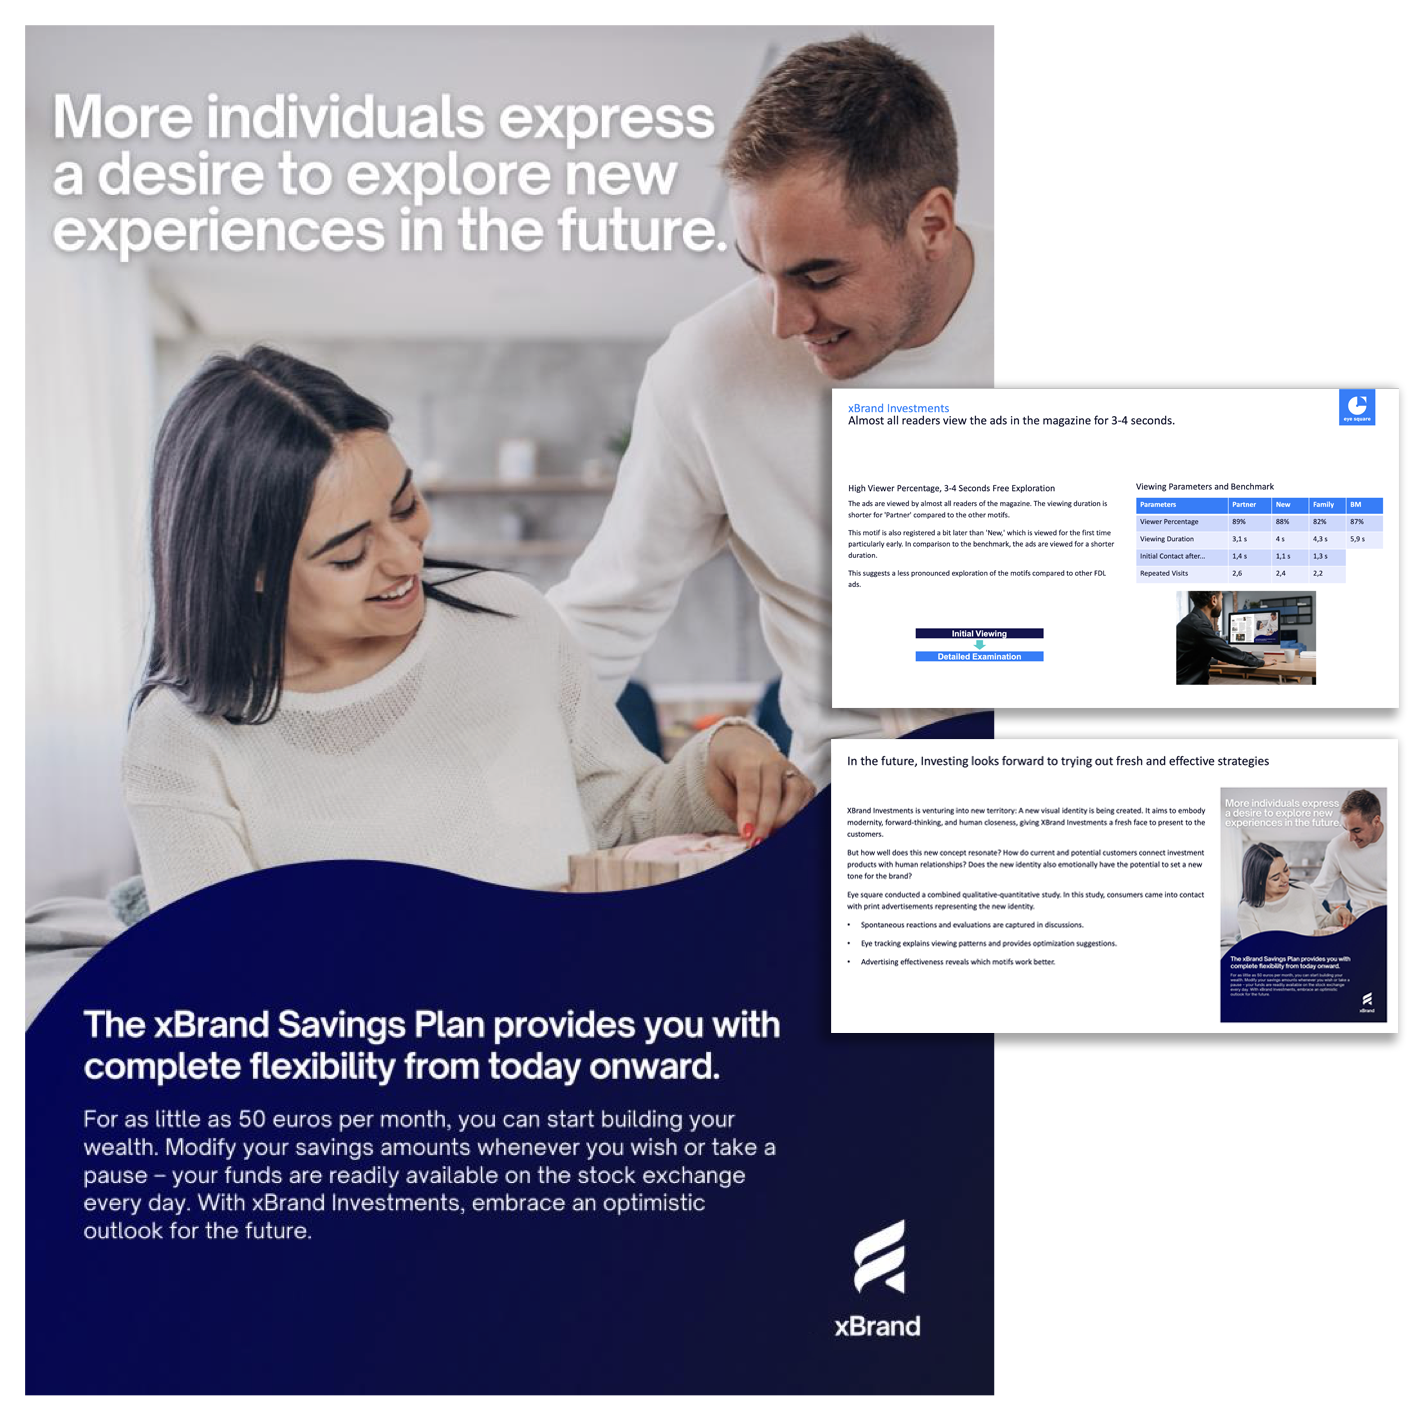 An ad from Brandx (anonymized company) with two slides from the white paper overlaid on top to create a small sample of the advertised white paper